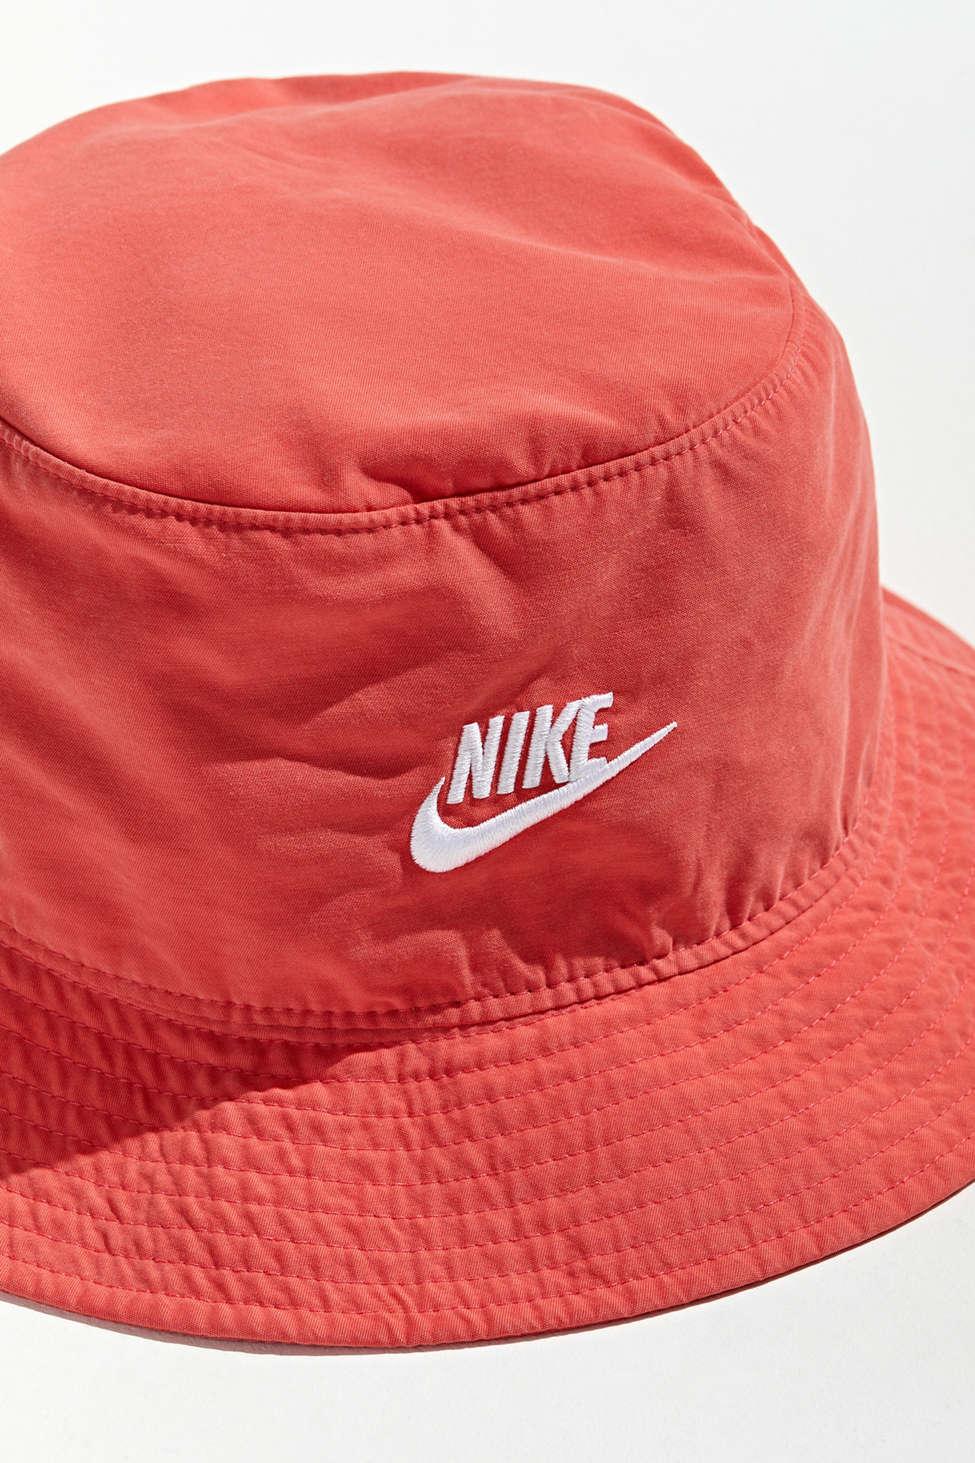 Nike Washed Bucket Hat in Red for Men - Lyst